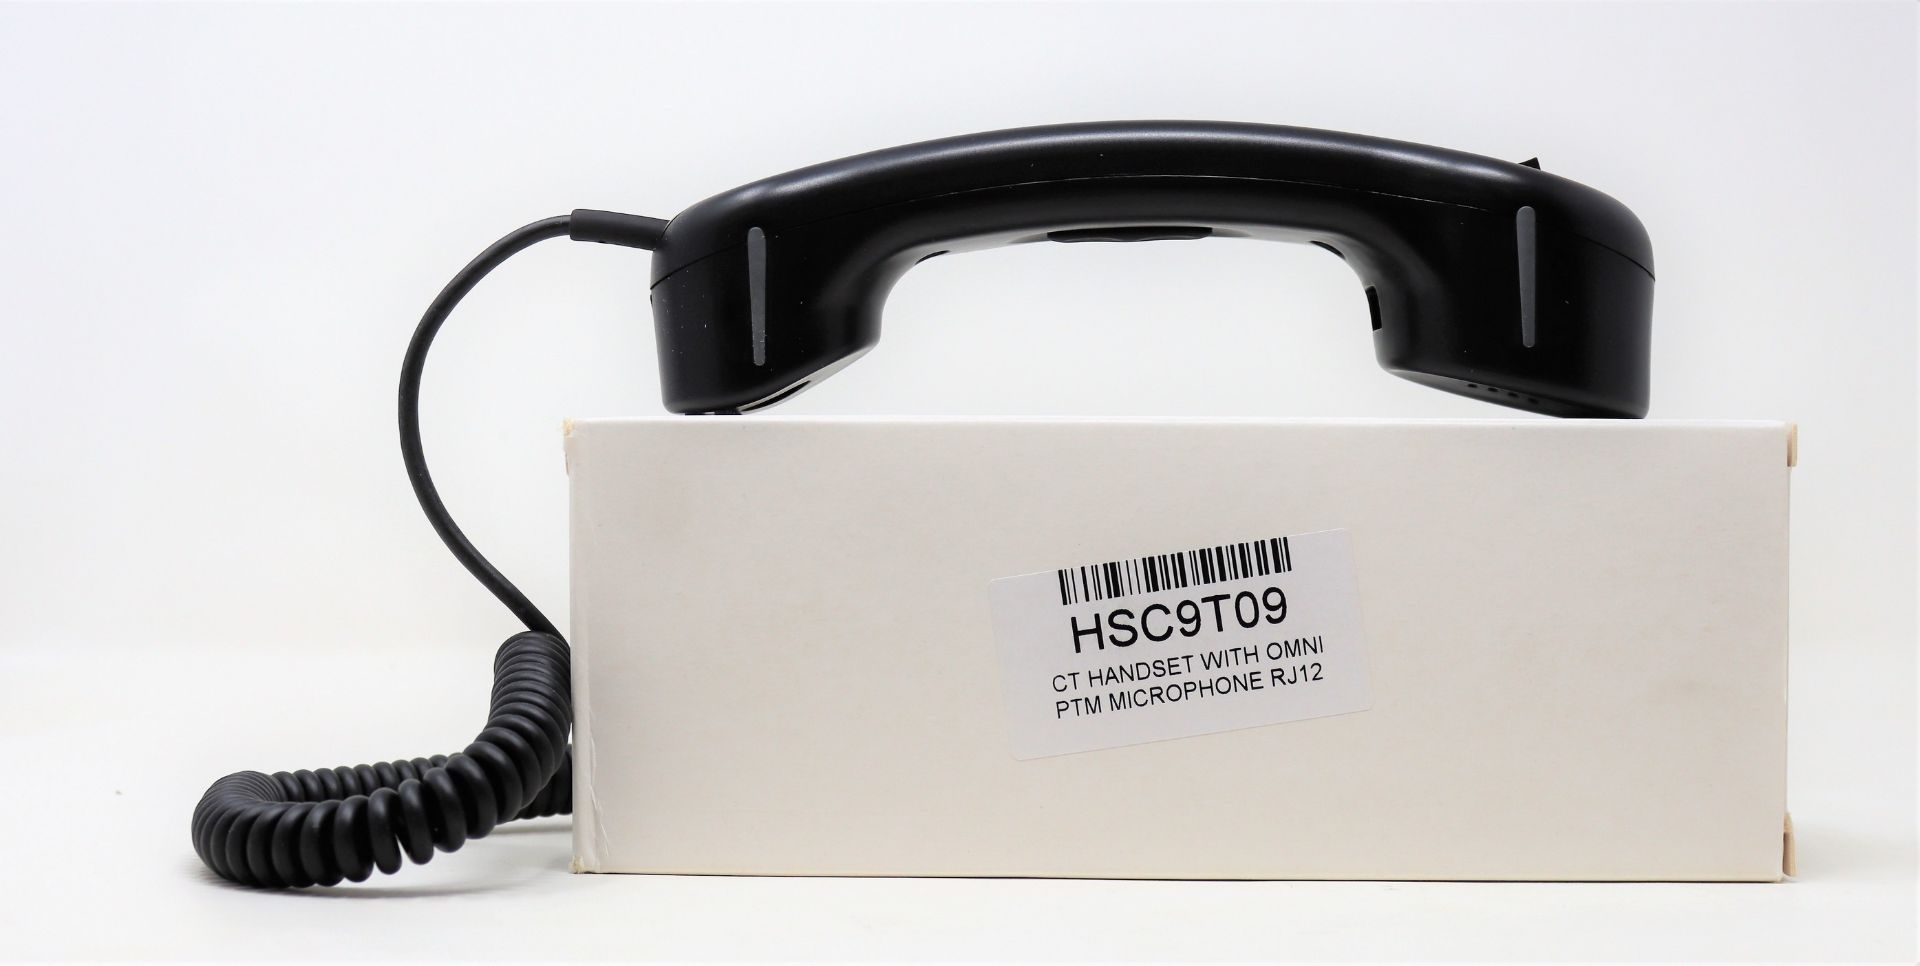 A quantity of boxed as new ClearTel CT Handsets with Omni PTM Microphone RJ12 (M/N: HSC9T09) (